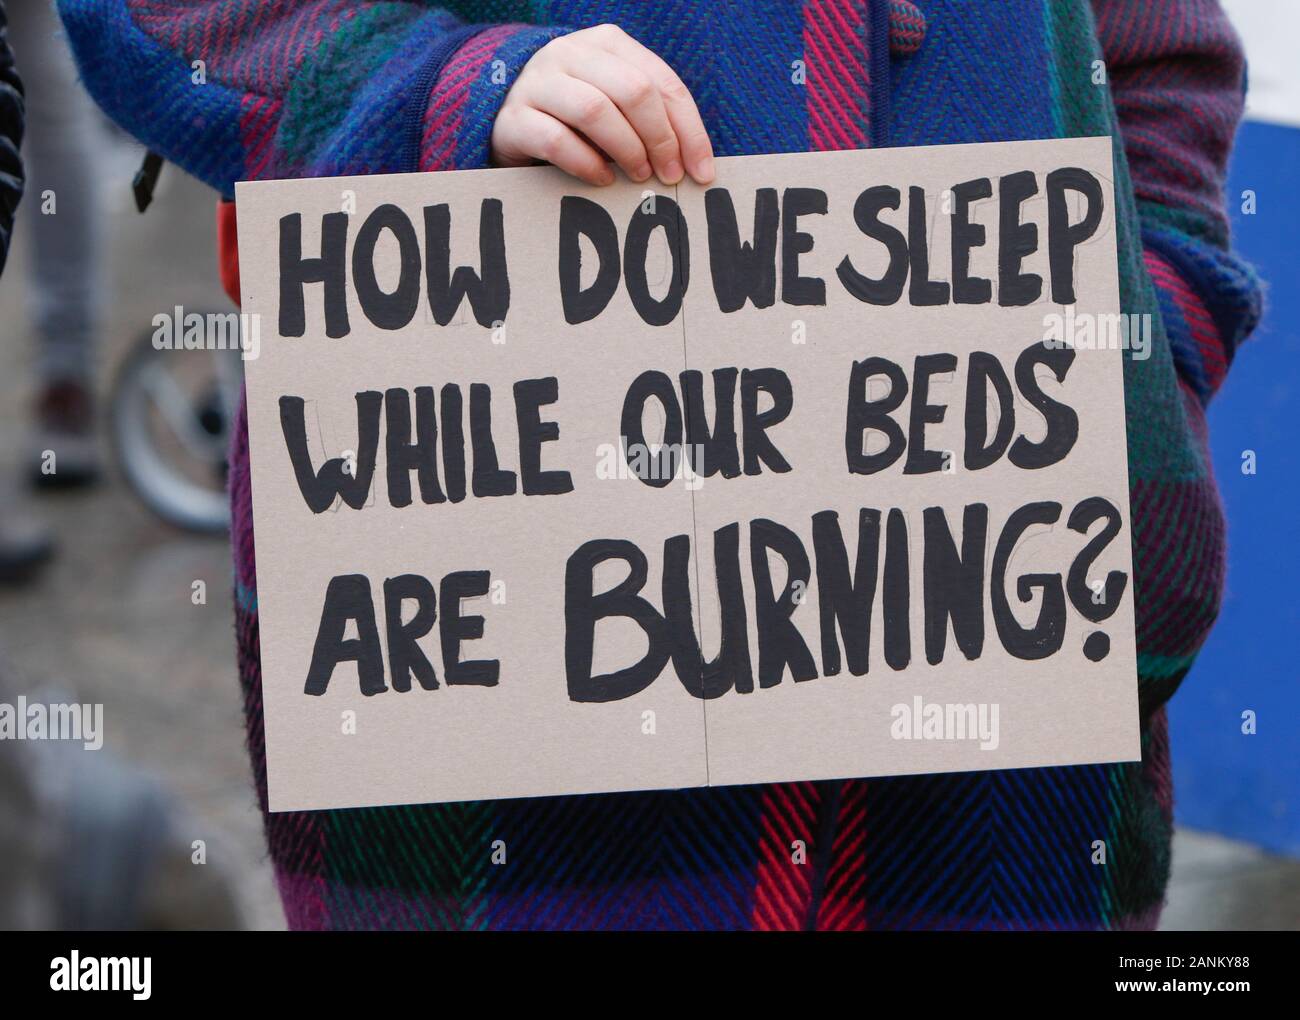 Mainz, Germany. 17th Jan, 2020. A protester holds a poster that reads “How  do we sleep while our beds are burning?”. Over 9,000 young people marched  through Mainz in a protest against